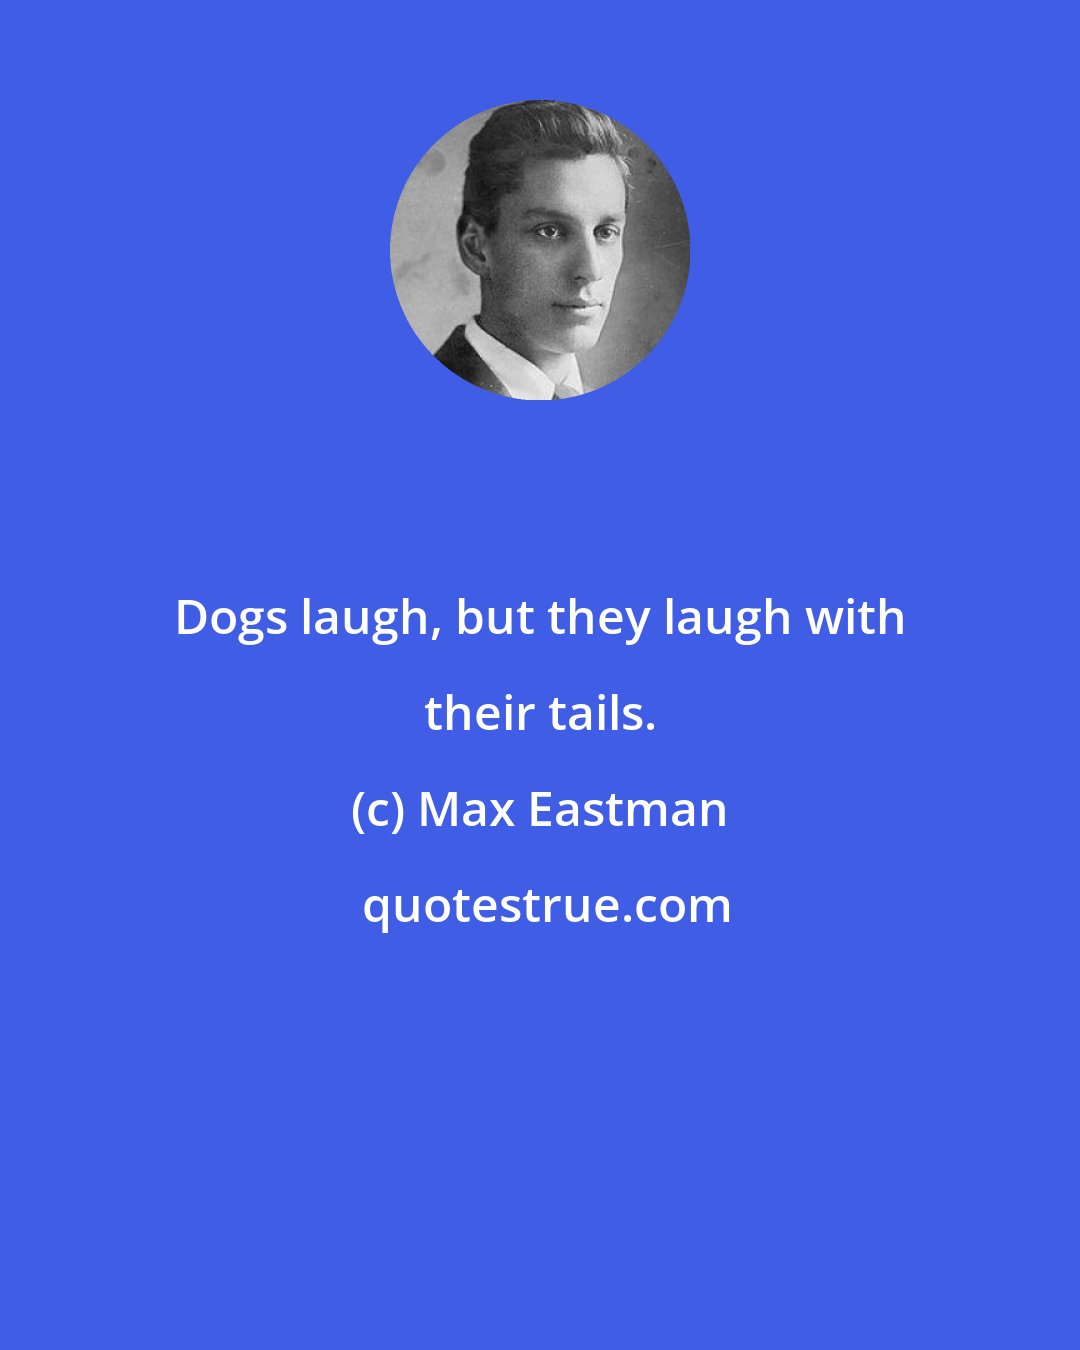 Max Eastman: Dogs laugh, but they laugh with their tails.